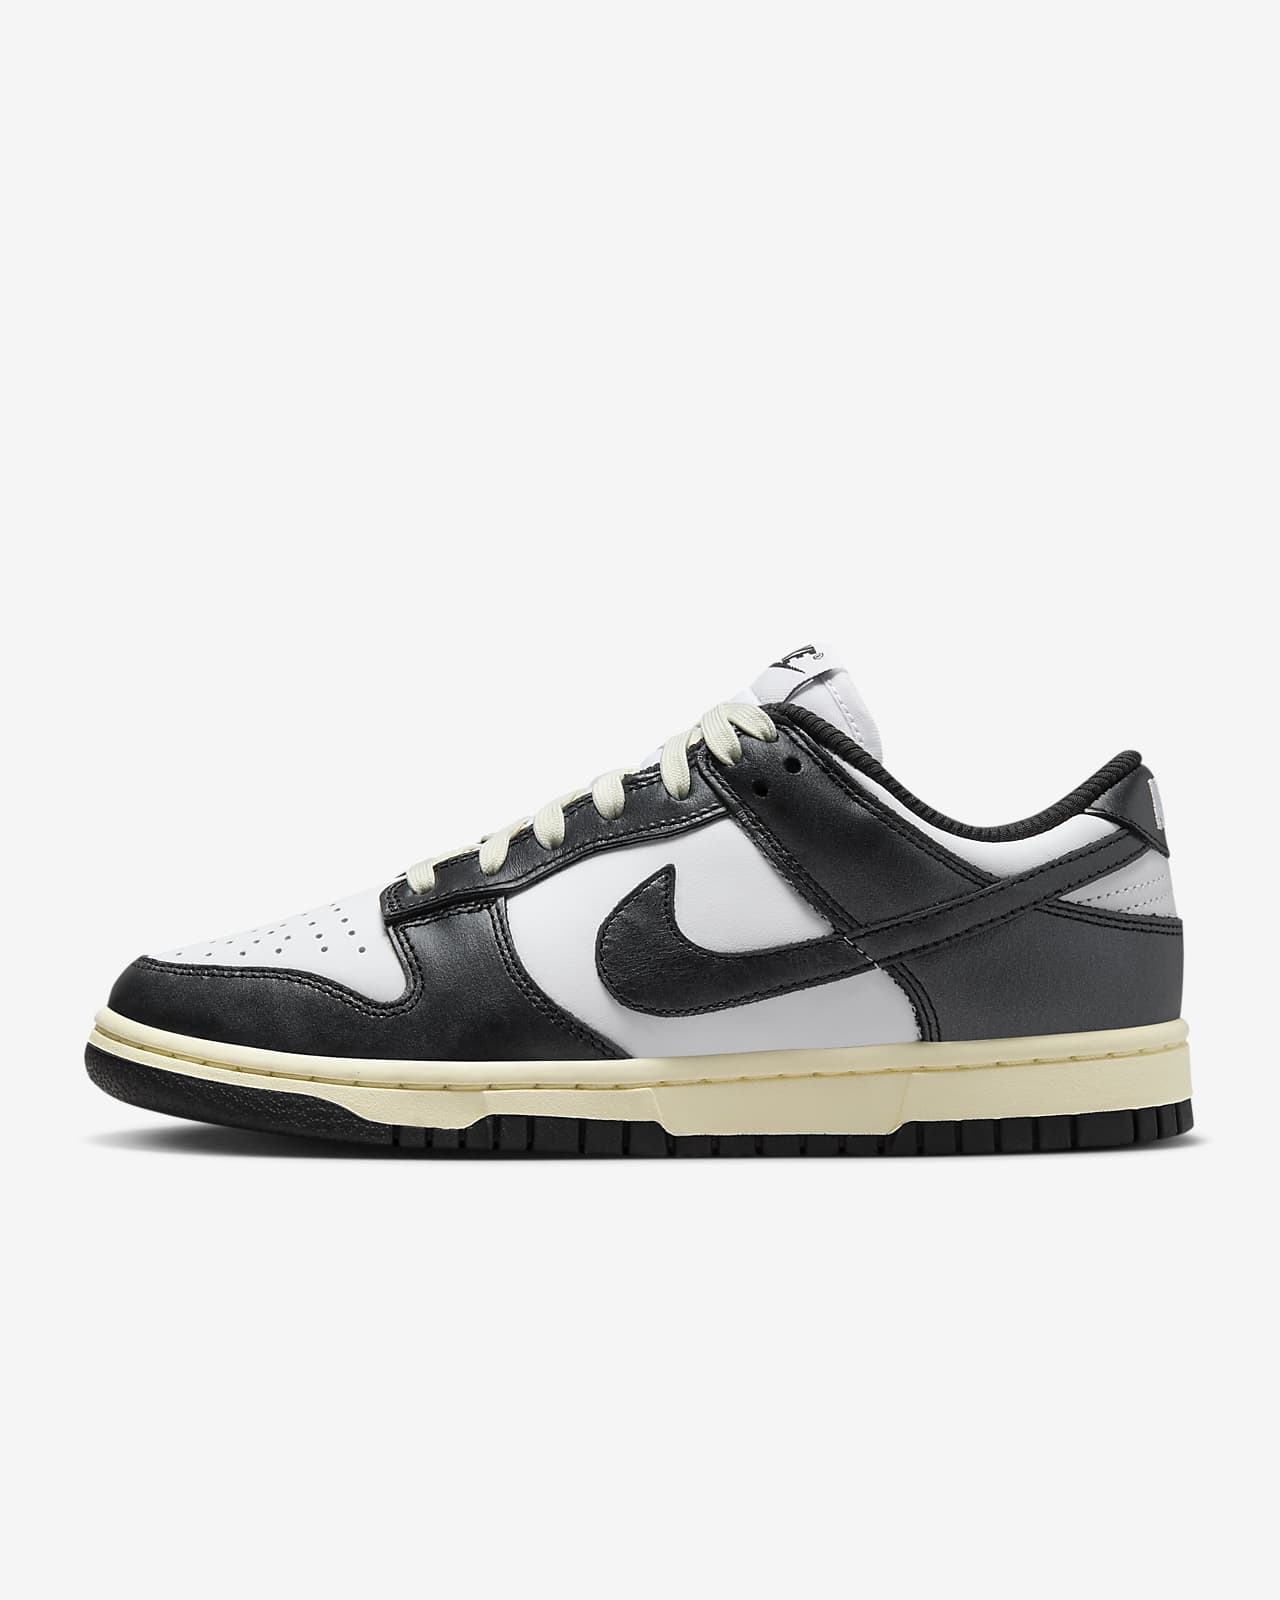 NIKE  DUNK  LOW  プレミアムダンク